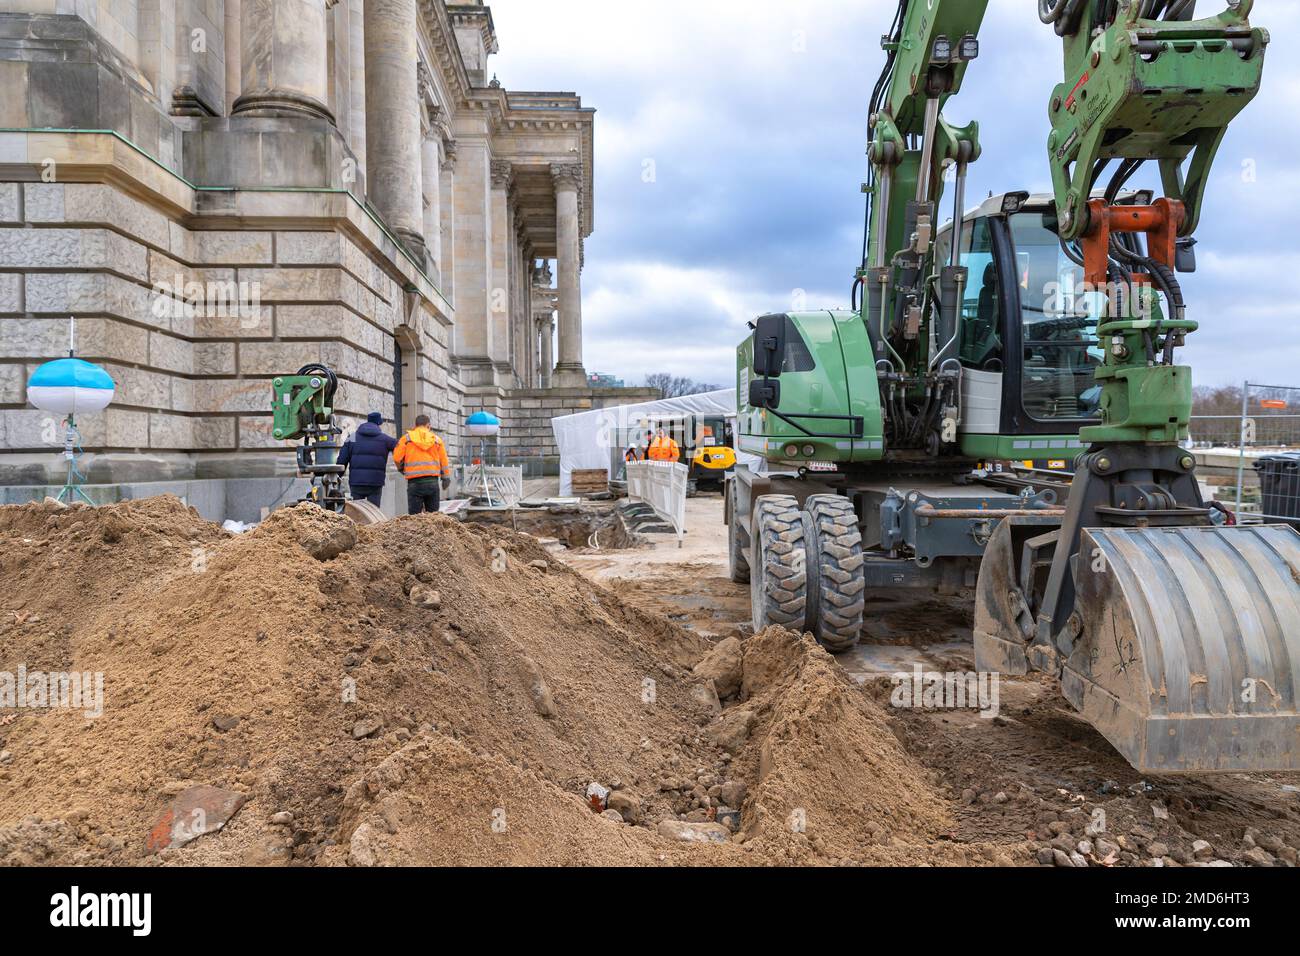 The renovation works in front of the Bundestag building. The German federal parliament. Сonstruction equipment in Berlin. Stock Photo